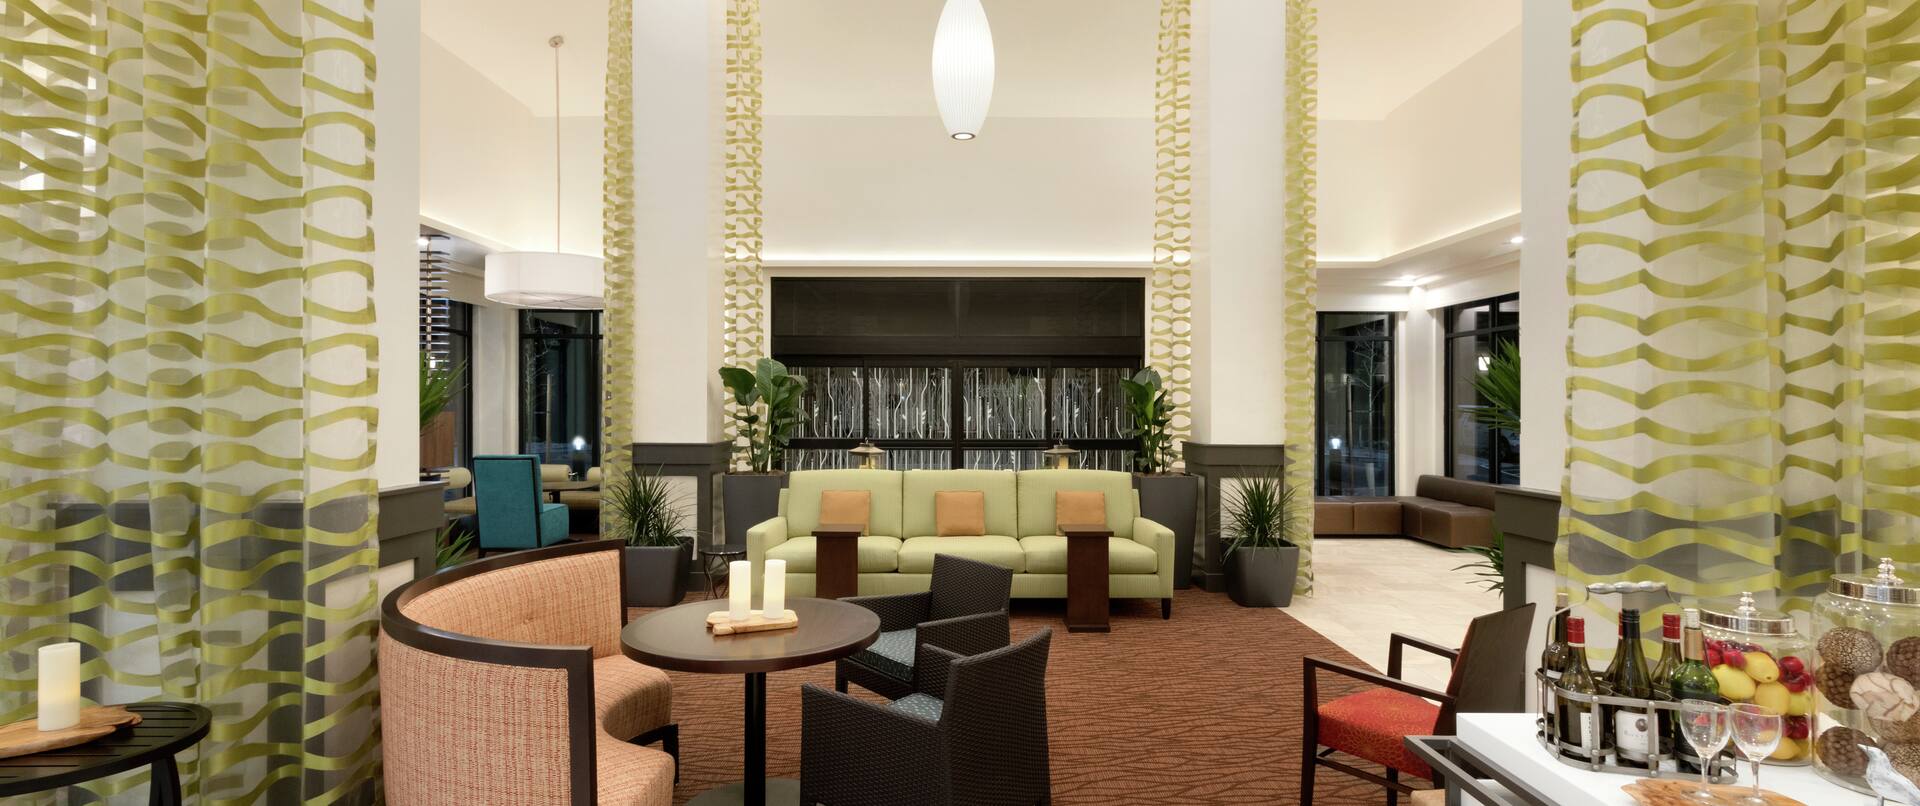 Lobby Seating Area and Beverage Cart